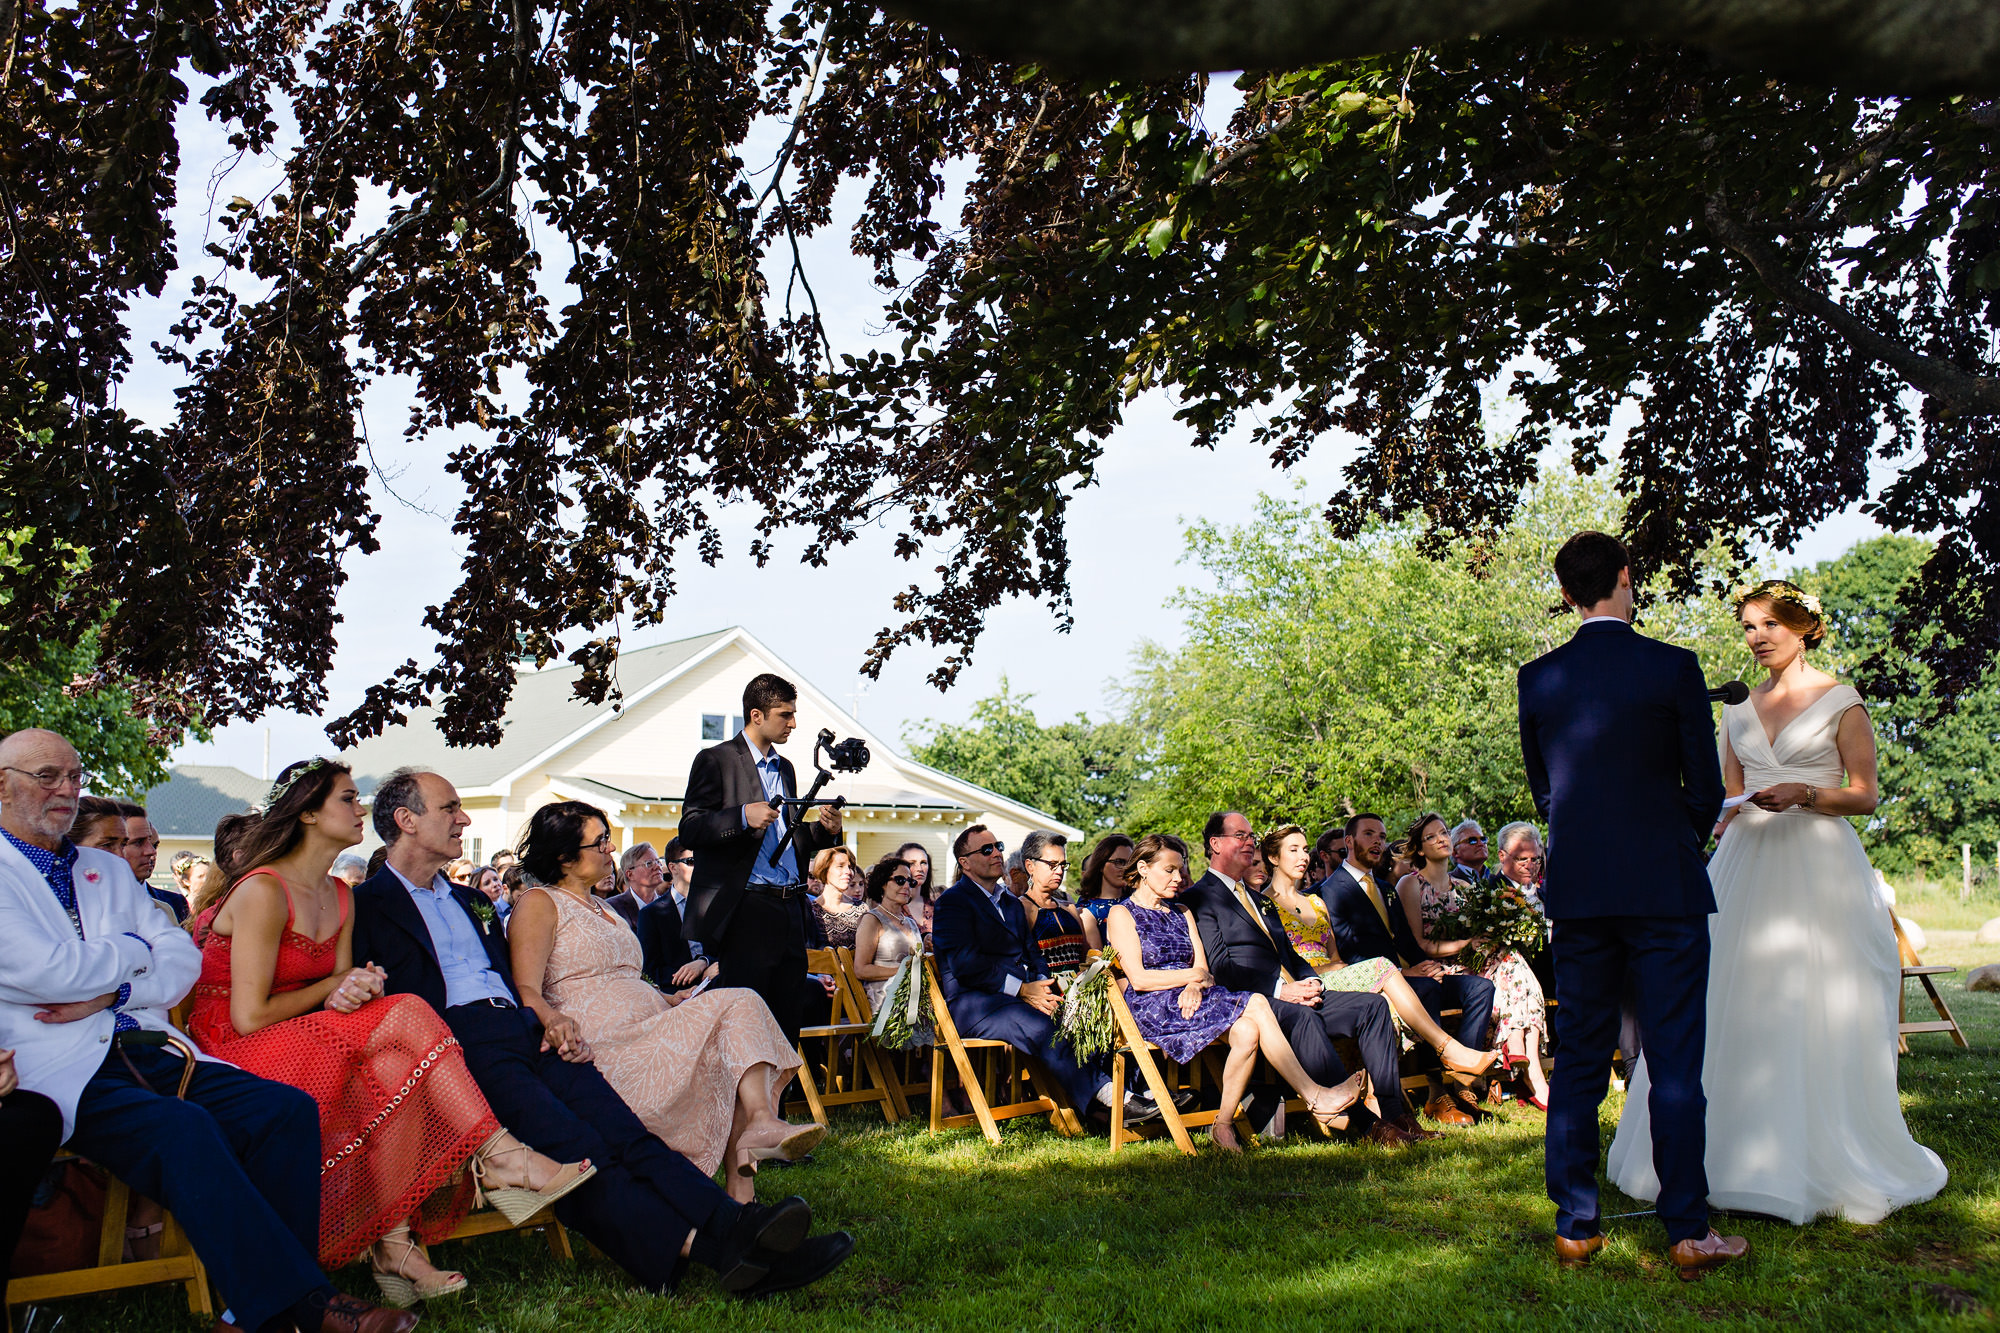 A beautiful wedding ceremony under a tree at Lauldholm Farm in Wells, Maine